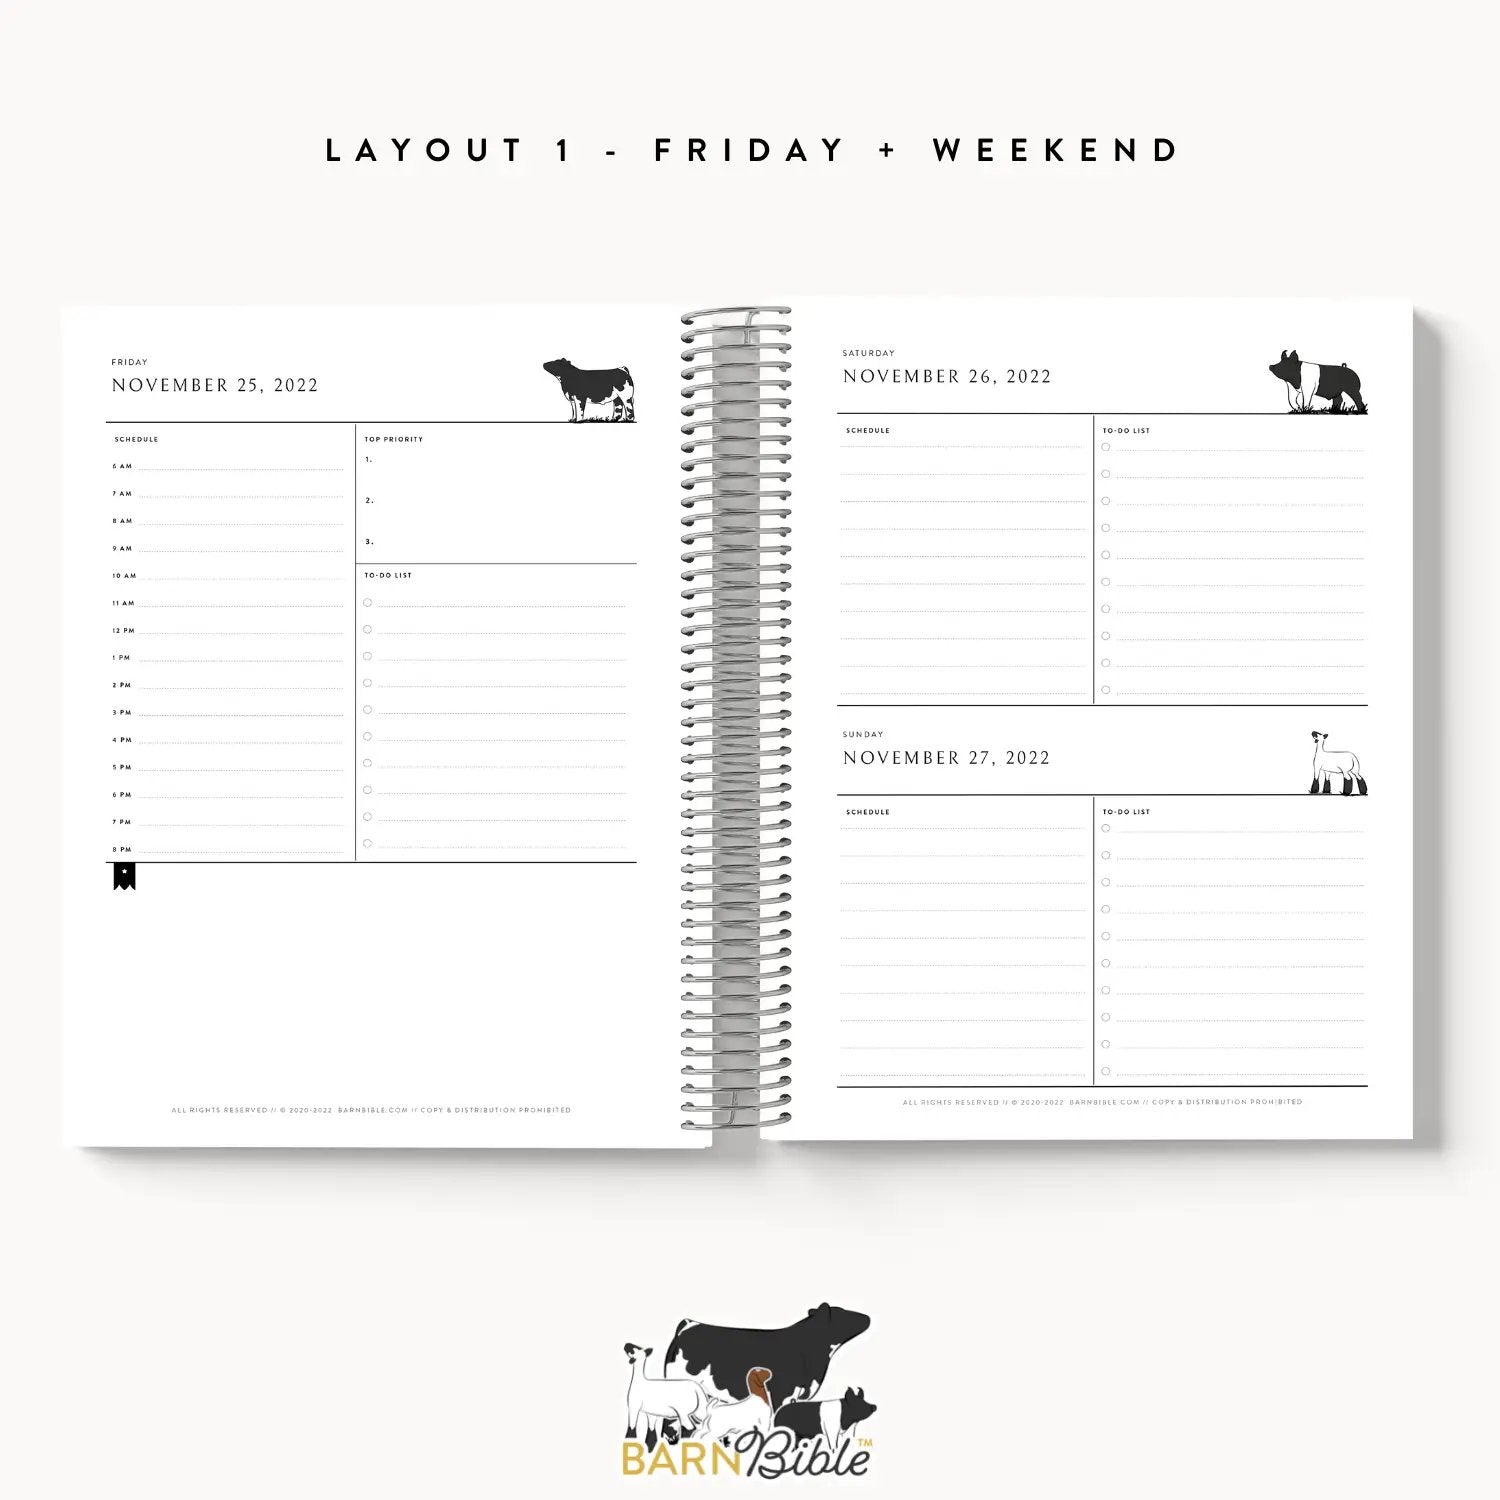 Personalized-Livestock-Daily Planner - Gingham Cover